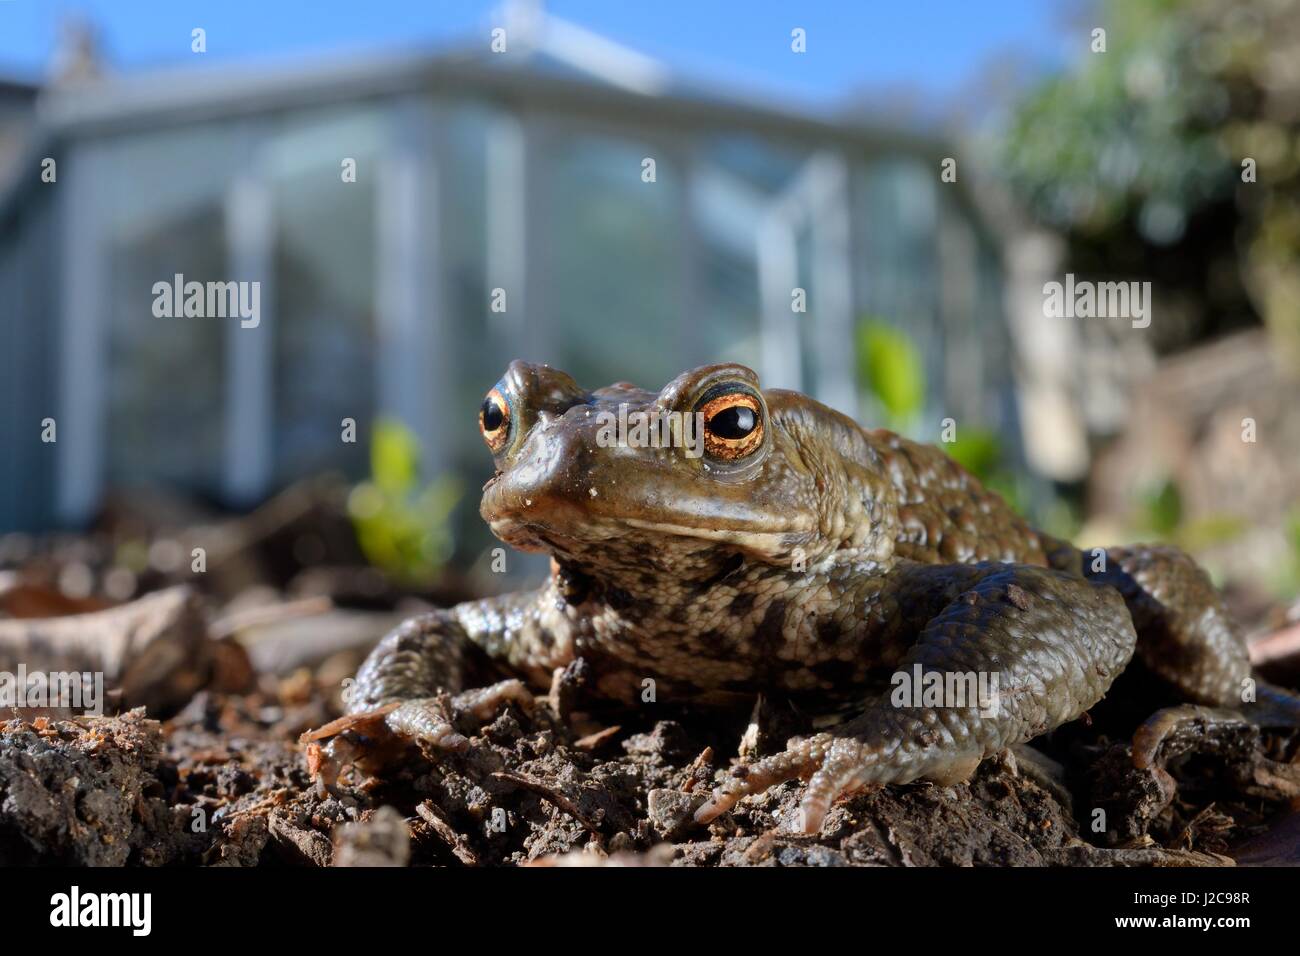 Common toad (Bufo bufo) in a garden flowerbed next to a conservatory, Wiltshire, UK, March. Stock Photo